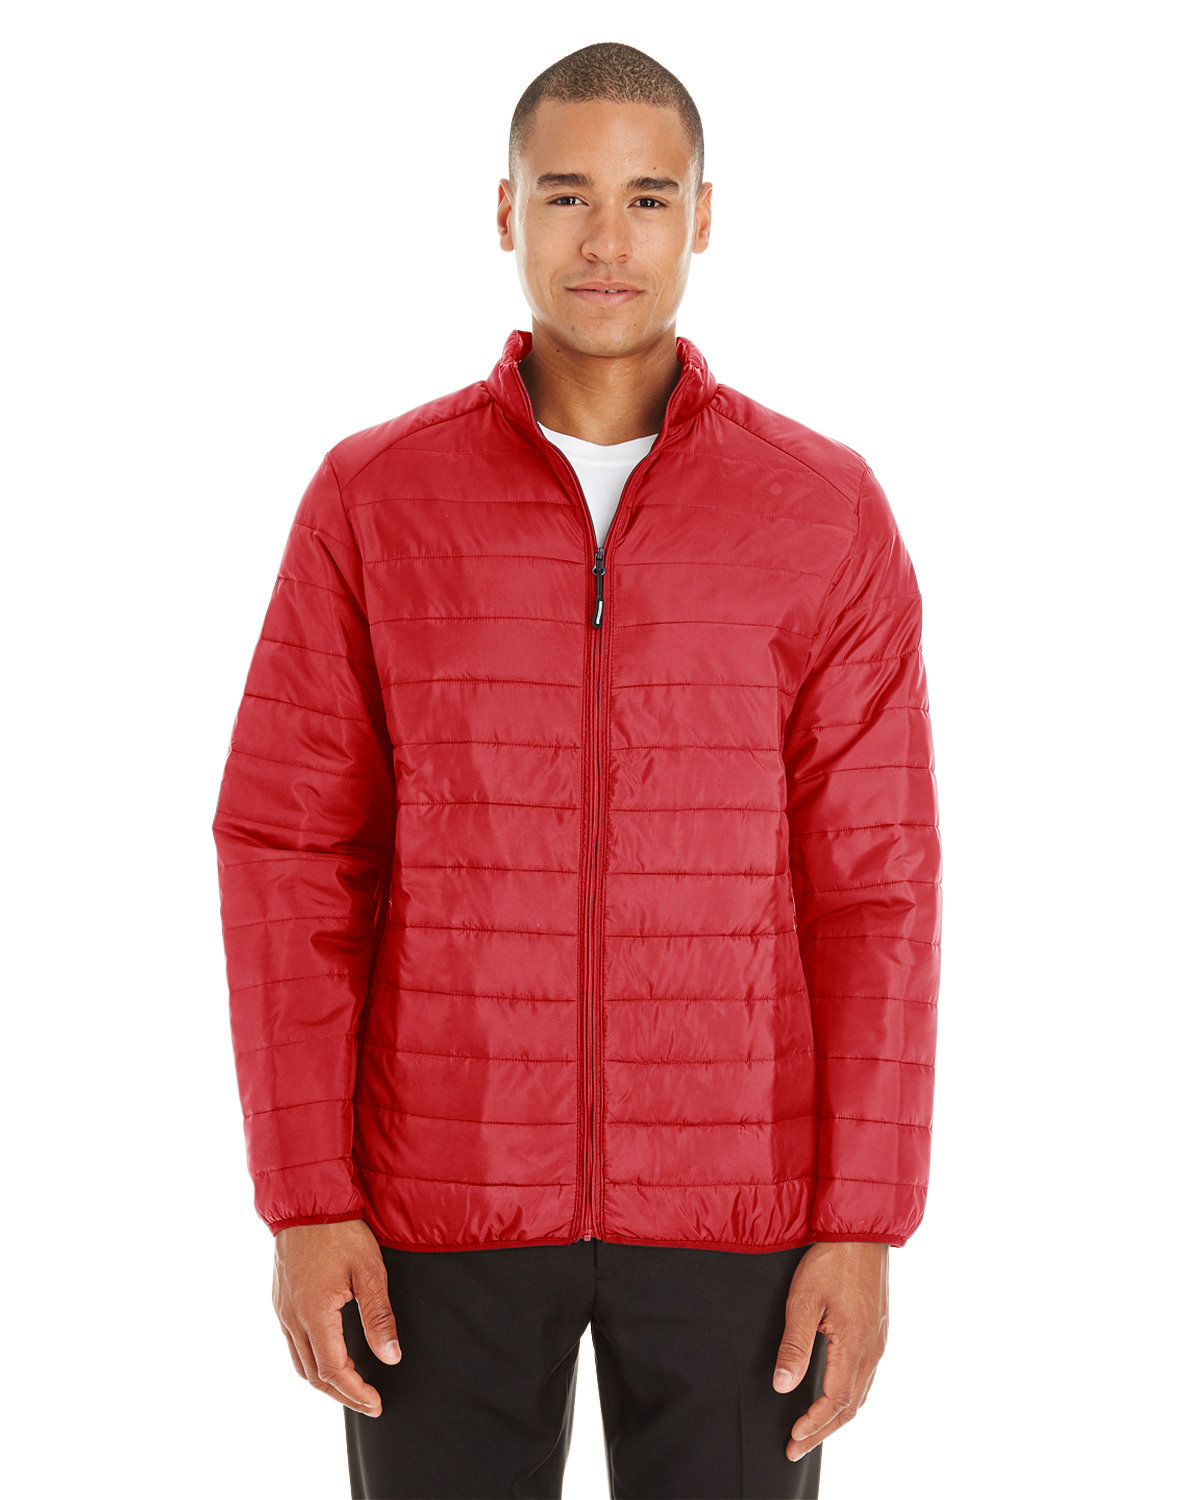 Core 365 Men's Prevail Packable Puffer Jacket CLASSIC RED 